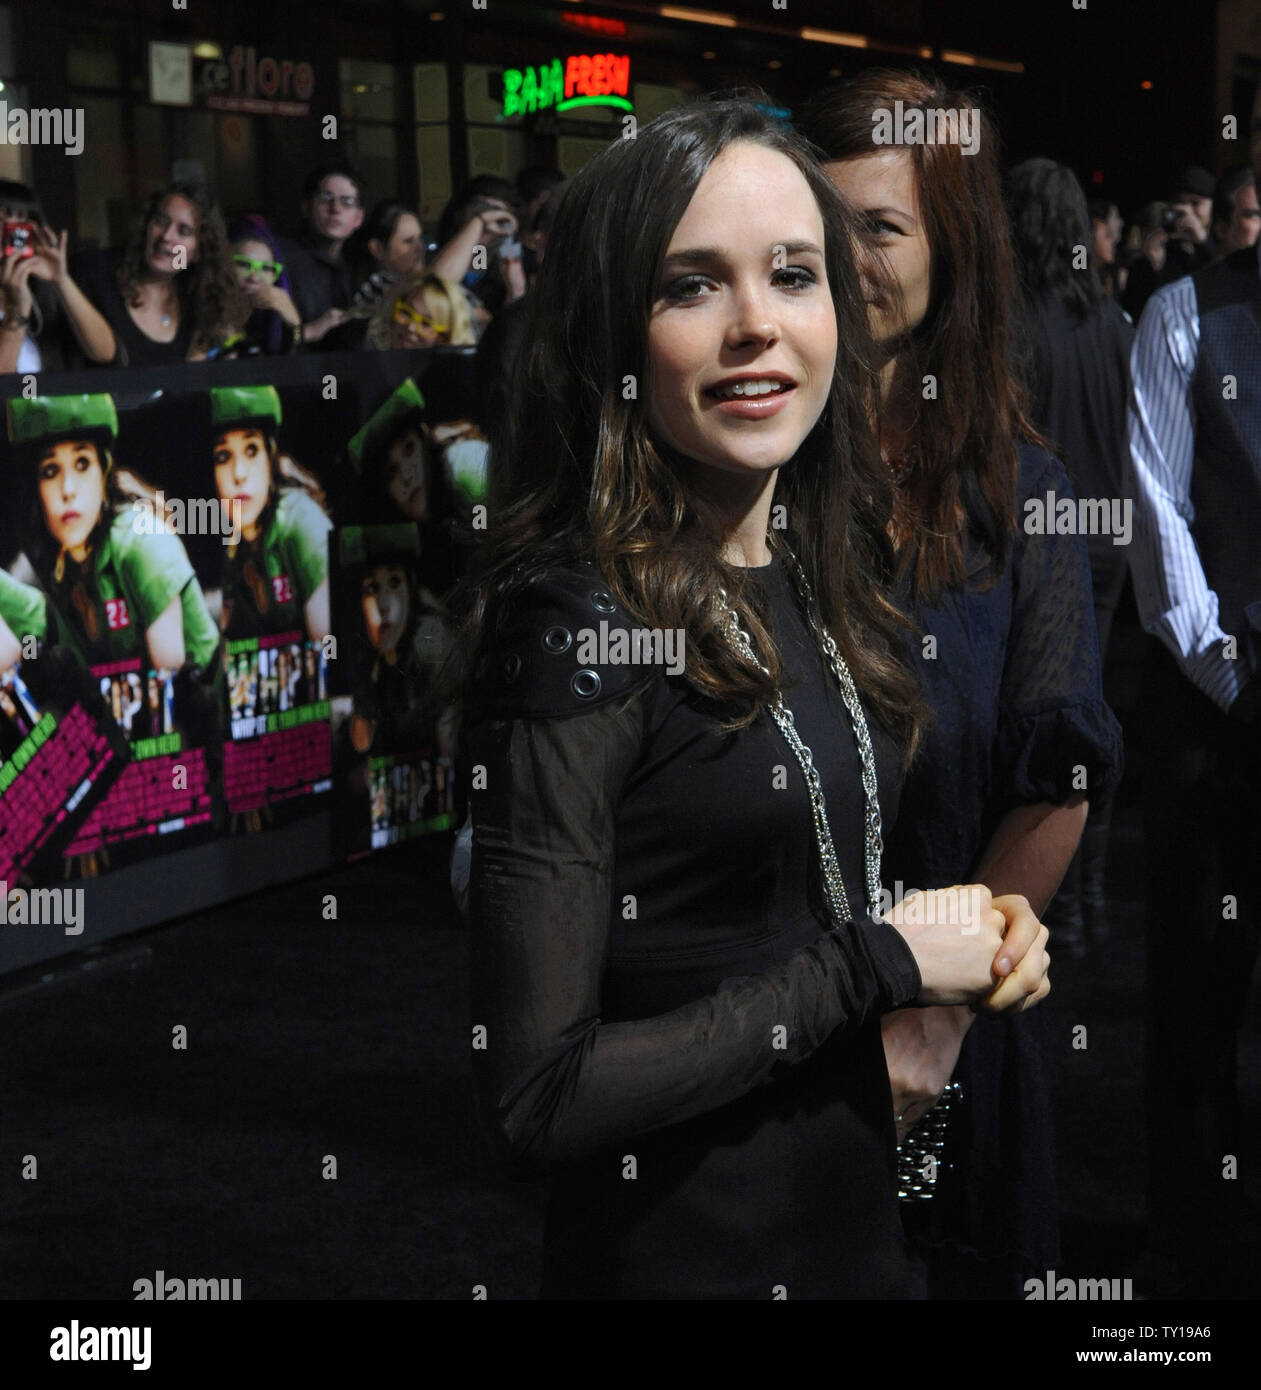 Ellen Page, a cast member in the new motion picture dramatic comedy 'Whip It', attends the premiere of the film at Grauman's Chinese Theatre in the Hollywood section of  Los Angeles on September 29, 2009.     UPI/Jim Ruymen. Stock Photo